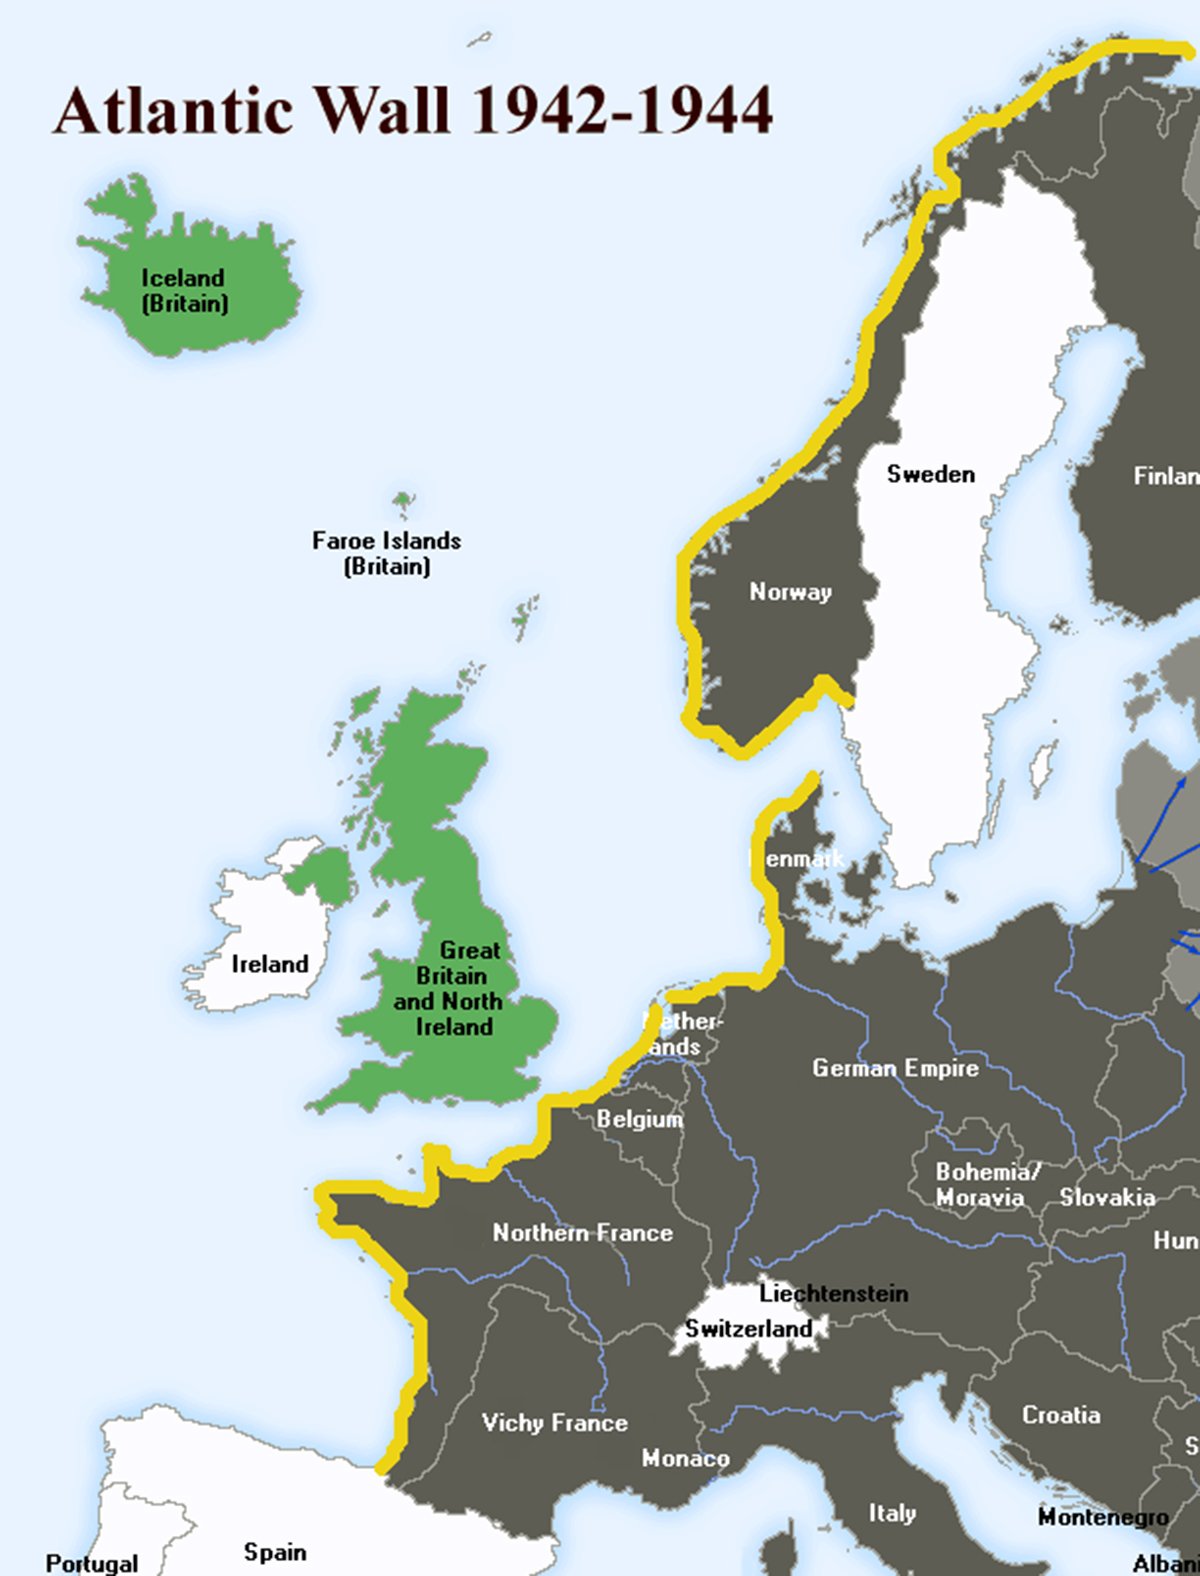 Map showing the extent of the Atlantic Wall from 1942-1944, a defensive barrier constructed by Nazi Germany along the western coast of Europe, from Norway down to the border of Spain.